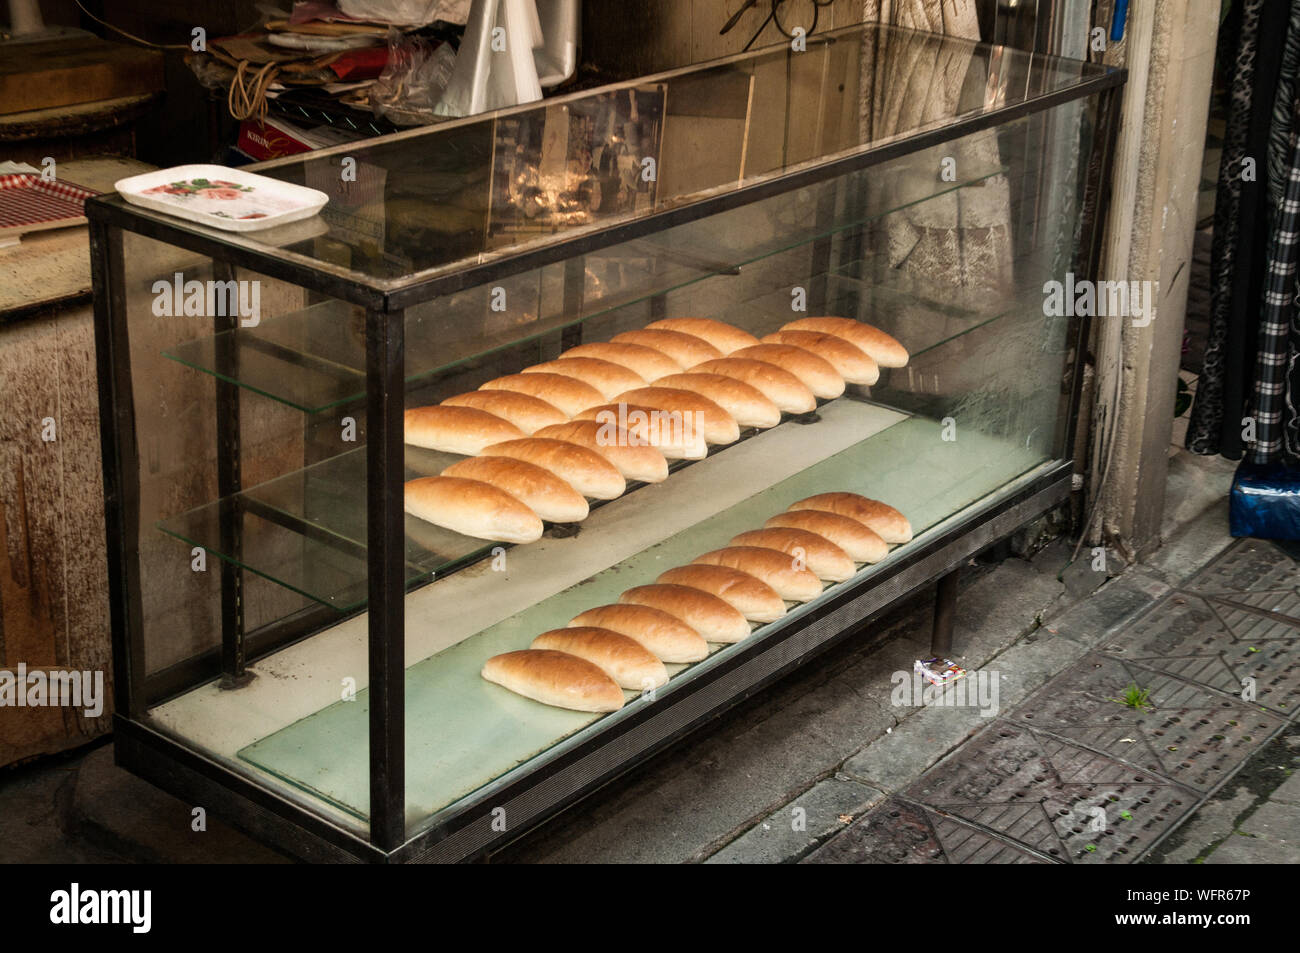 Breads In Display Cabinet At Bakery Stock Photo